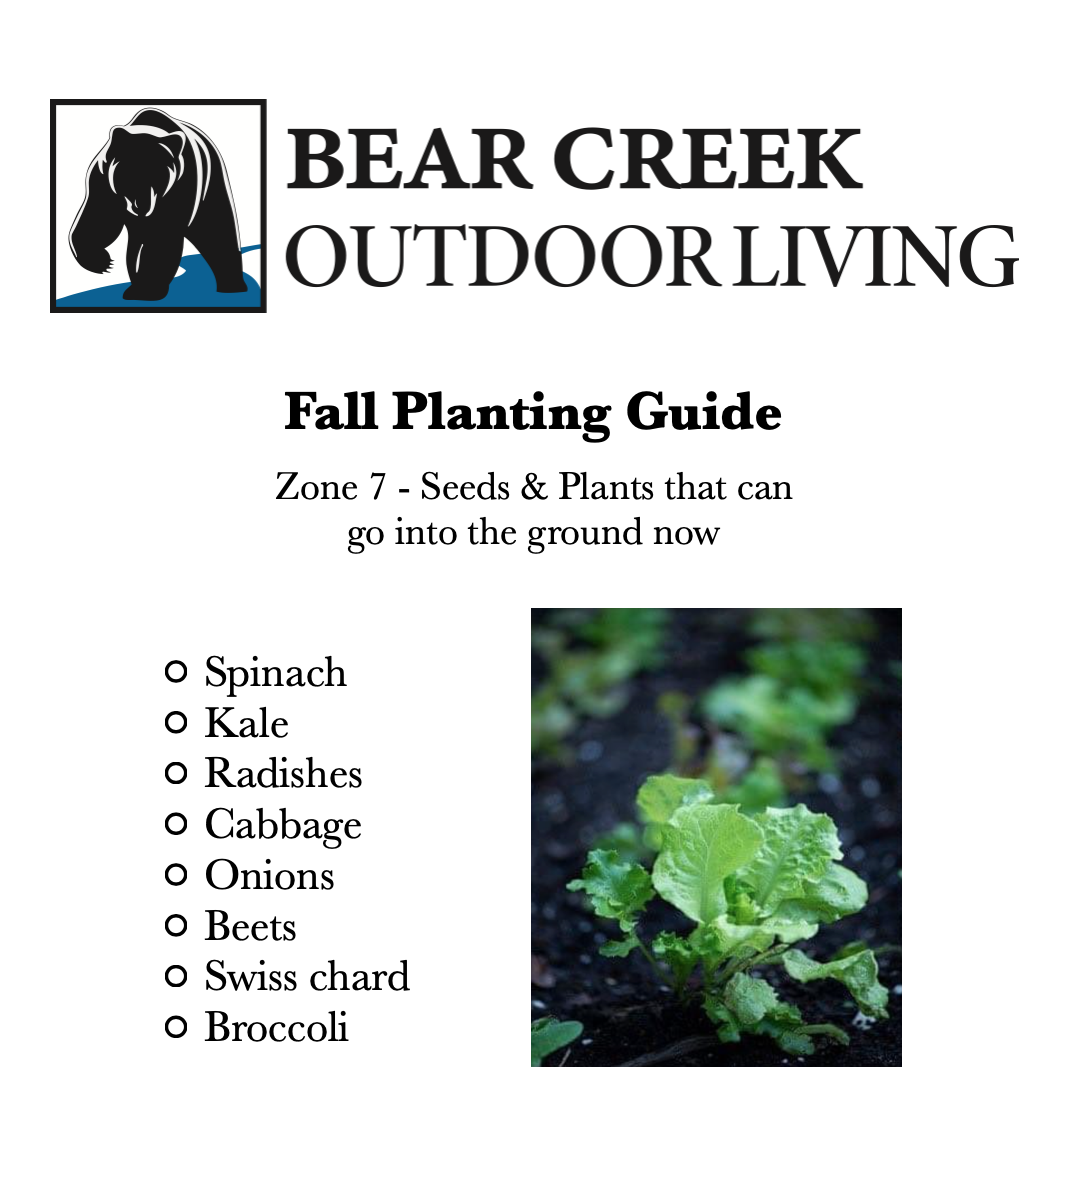 Fall Planting Guide, Zone 7 - Seeds & Plants that can go into the ground now, Spinach, Kale, Radishes, Cabbage, Onions, Beets, Swiss chard, Broccoli